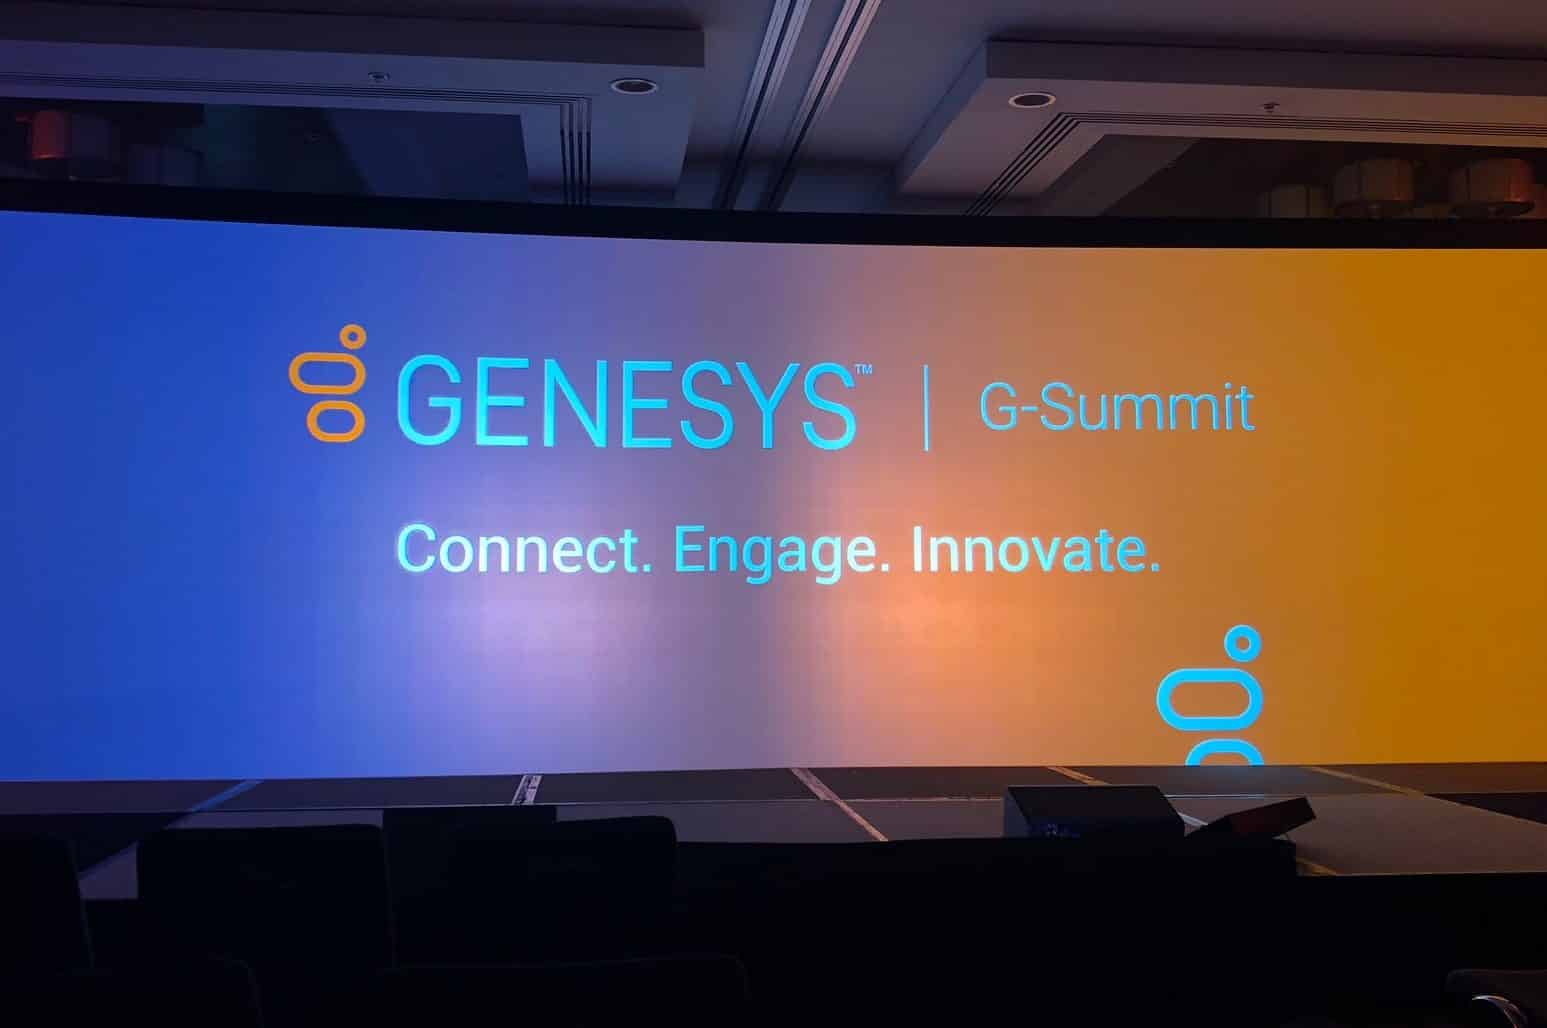 Genesys GSummit 2018 Innovation at the Front